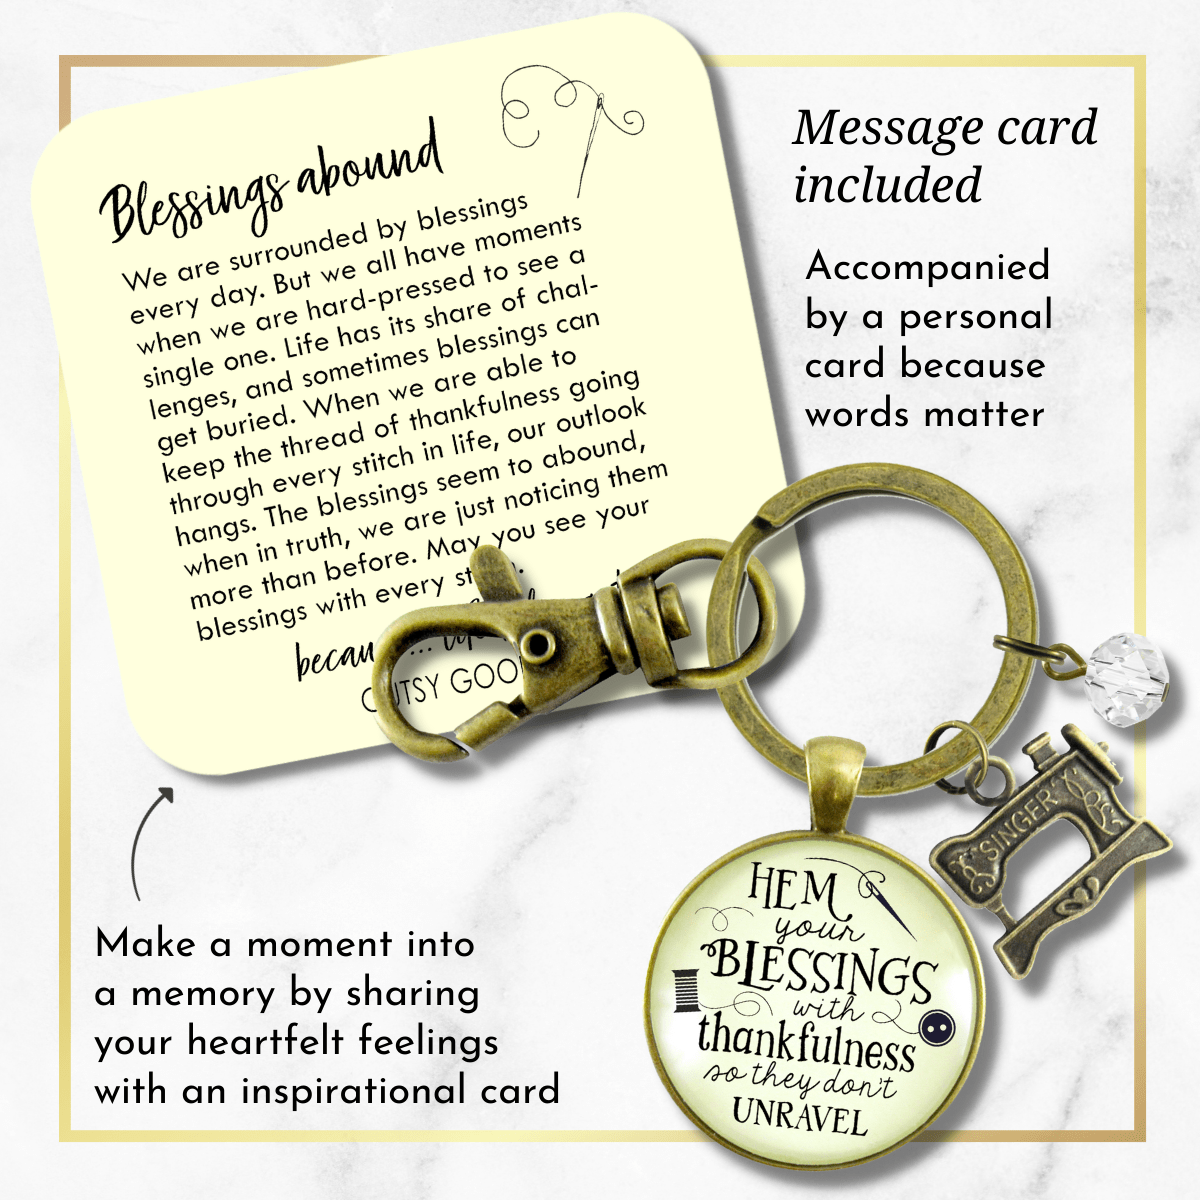 Seamstress Keychain Hem Your Blessings Thankful Grateful Womens Vintage Sewing Jewelry Gift - Gutsy Goodness Handmade Jewelry;Seamstress Keychain Hem Your Blessings Thankful Grateful Womens Vintage Sewing Jewelry Gift - Gutsy Goodness Handmade Jewelry Gifts